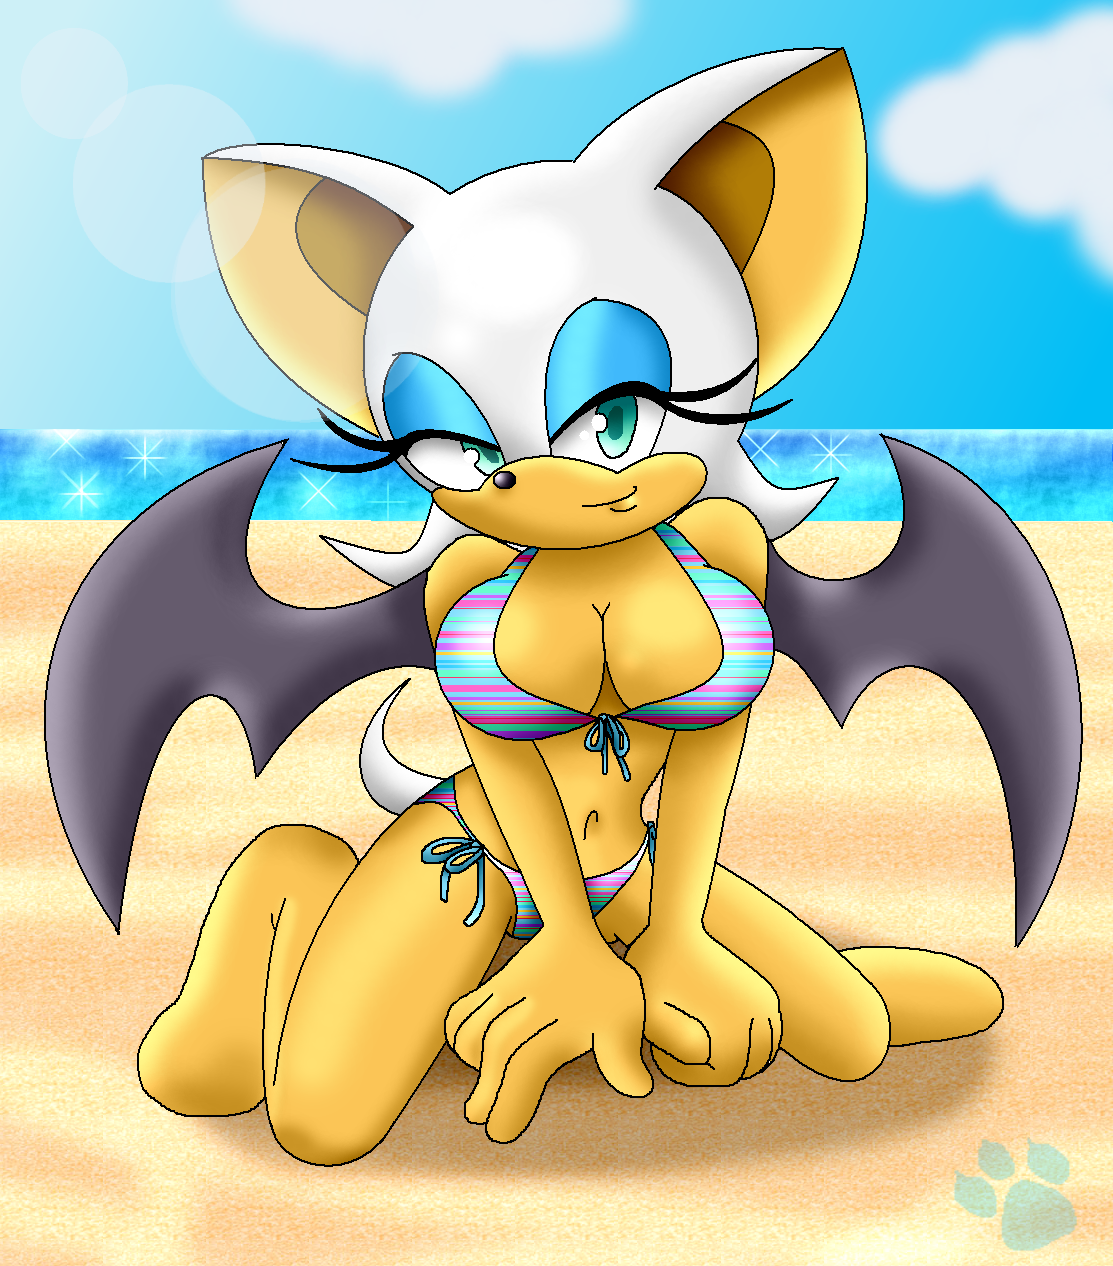 rouge the swimmer